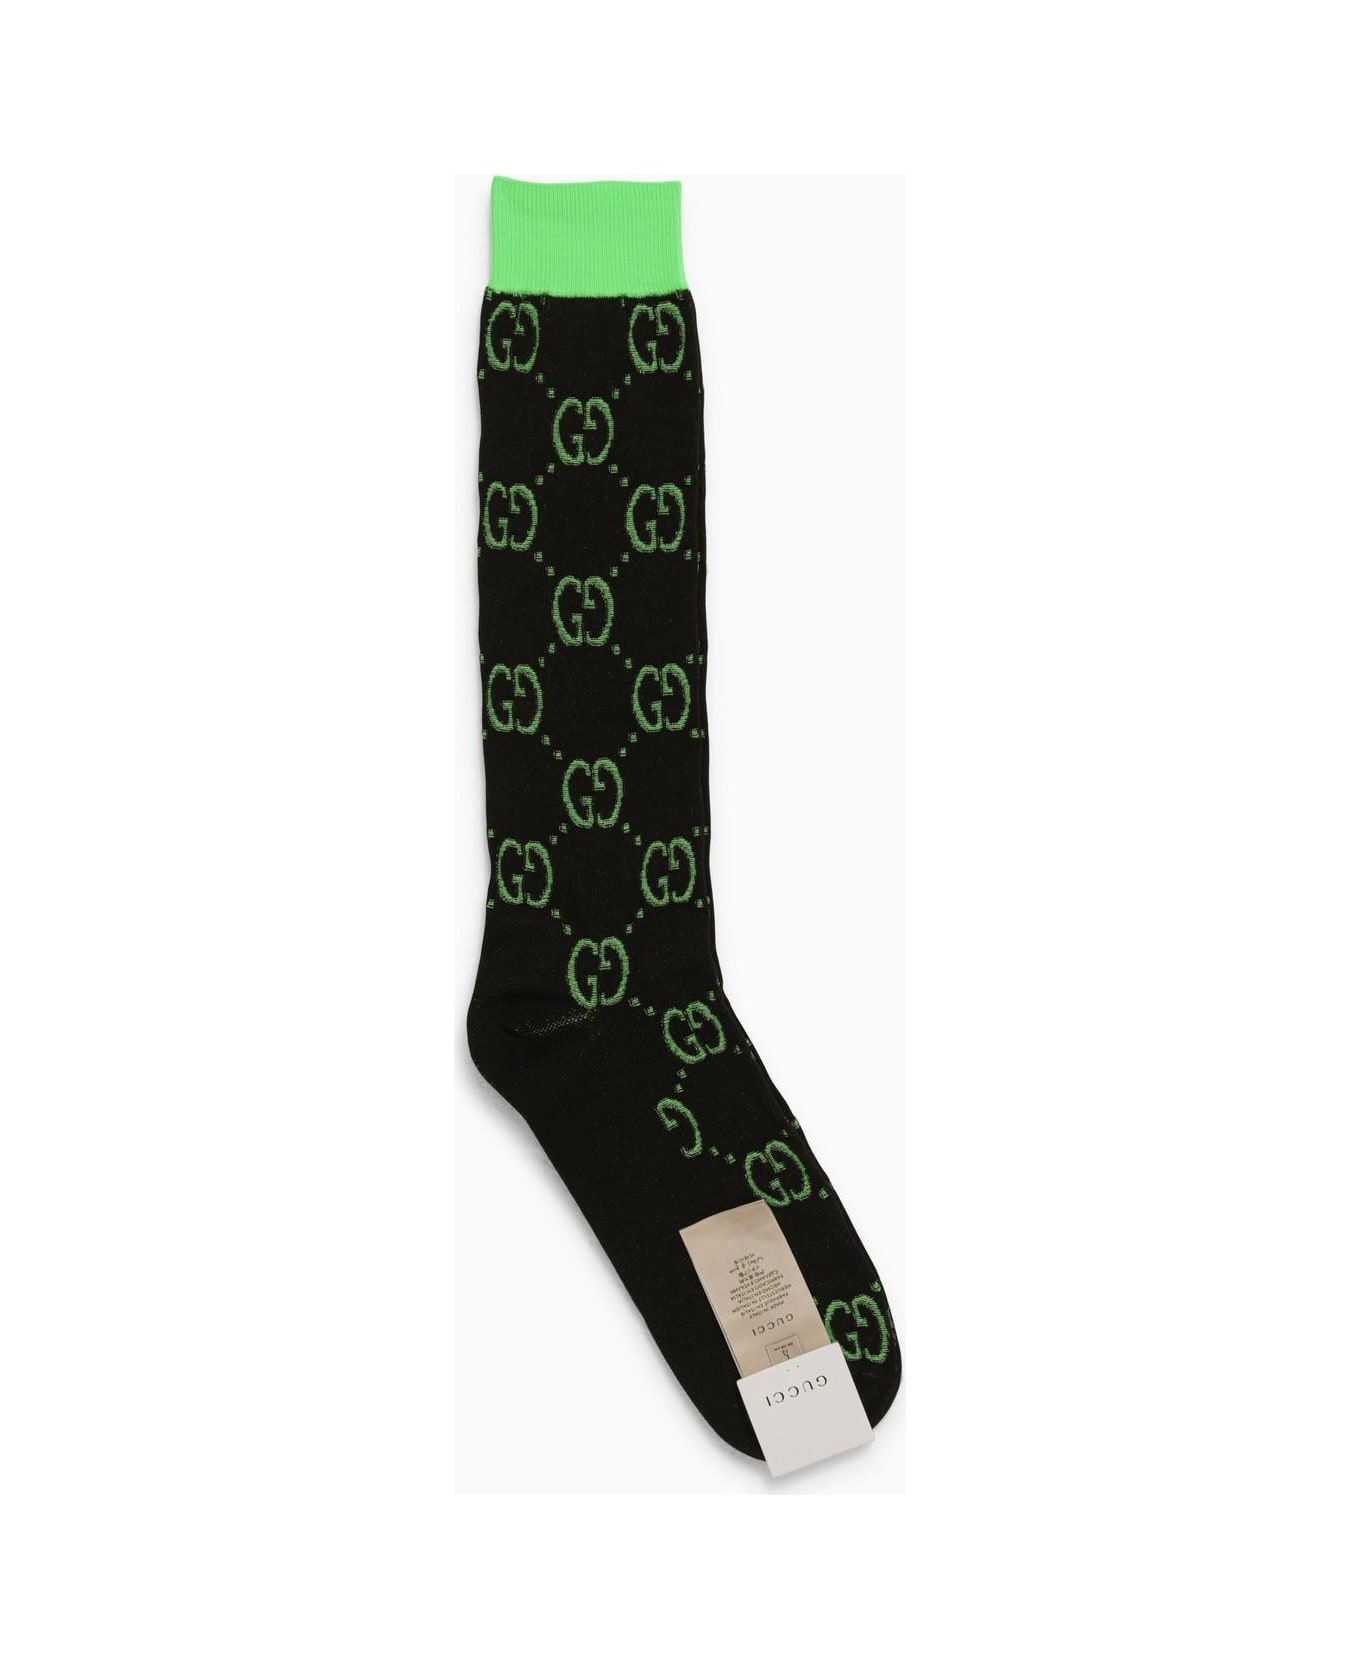 Black And Green Socks With Gg Motif - 1